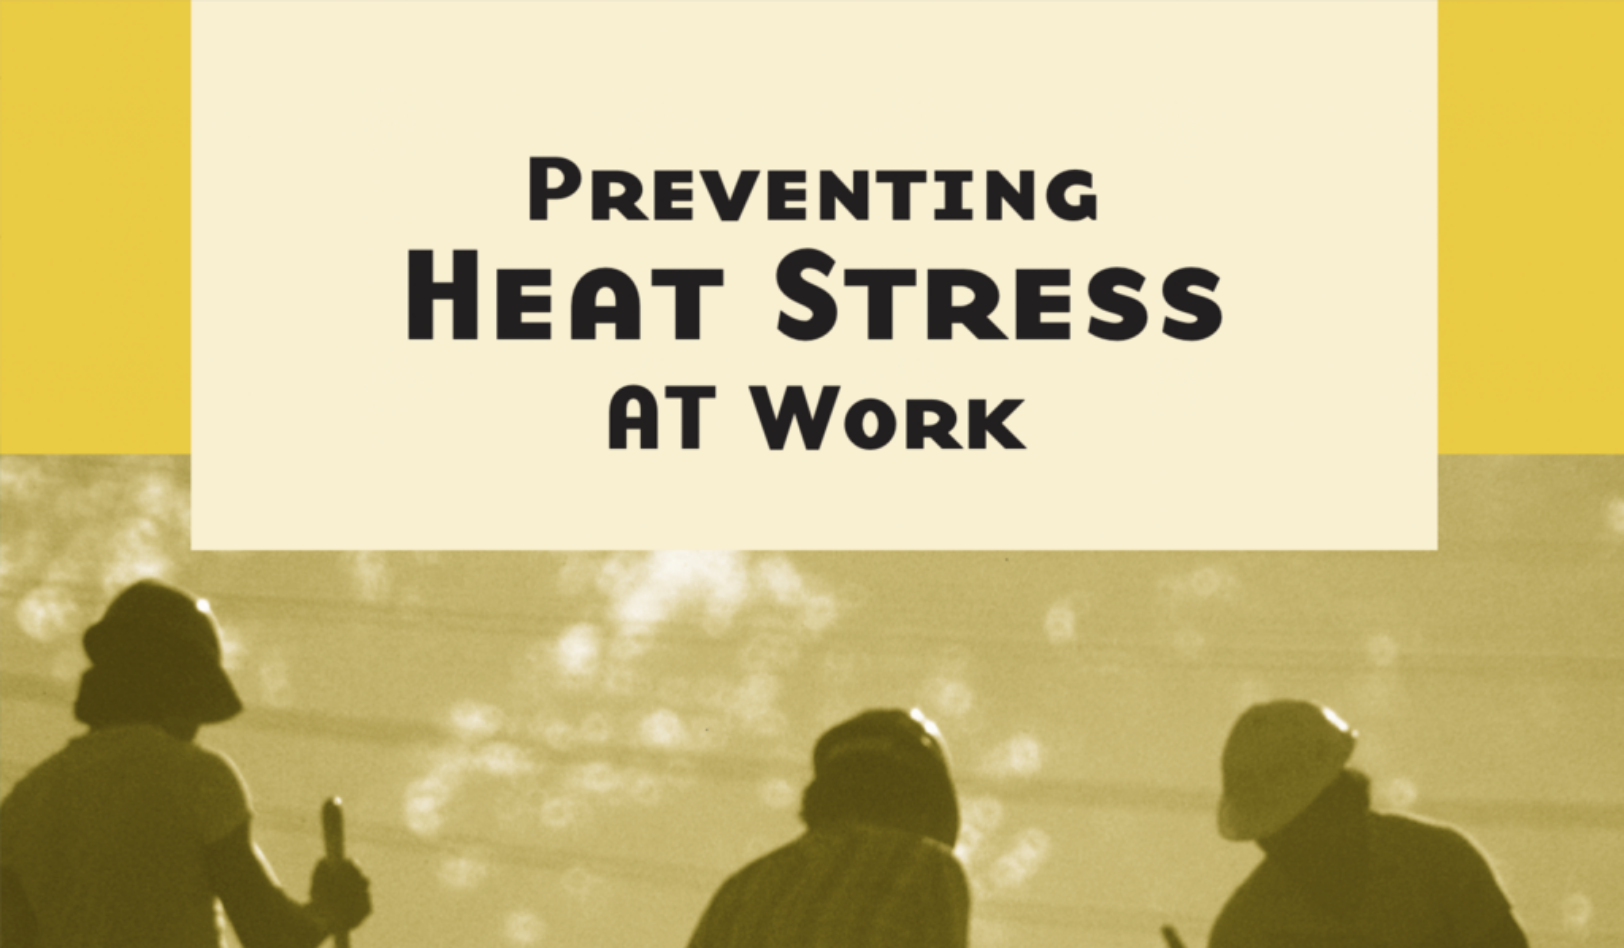 Preventing Heat Stress at Work